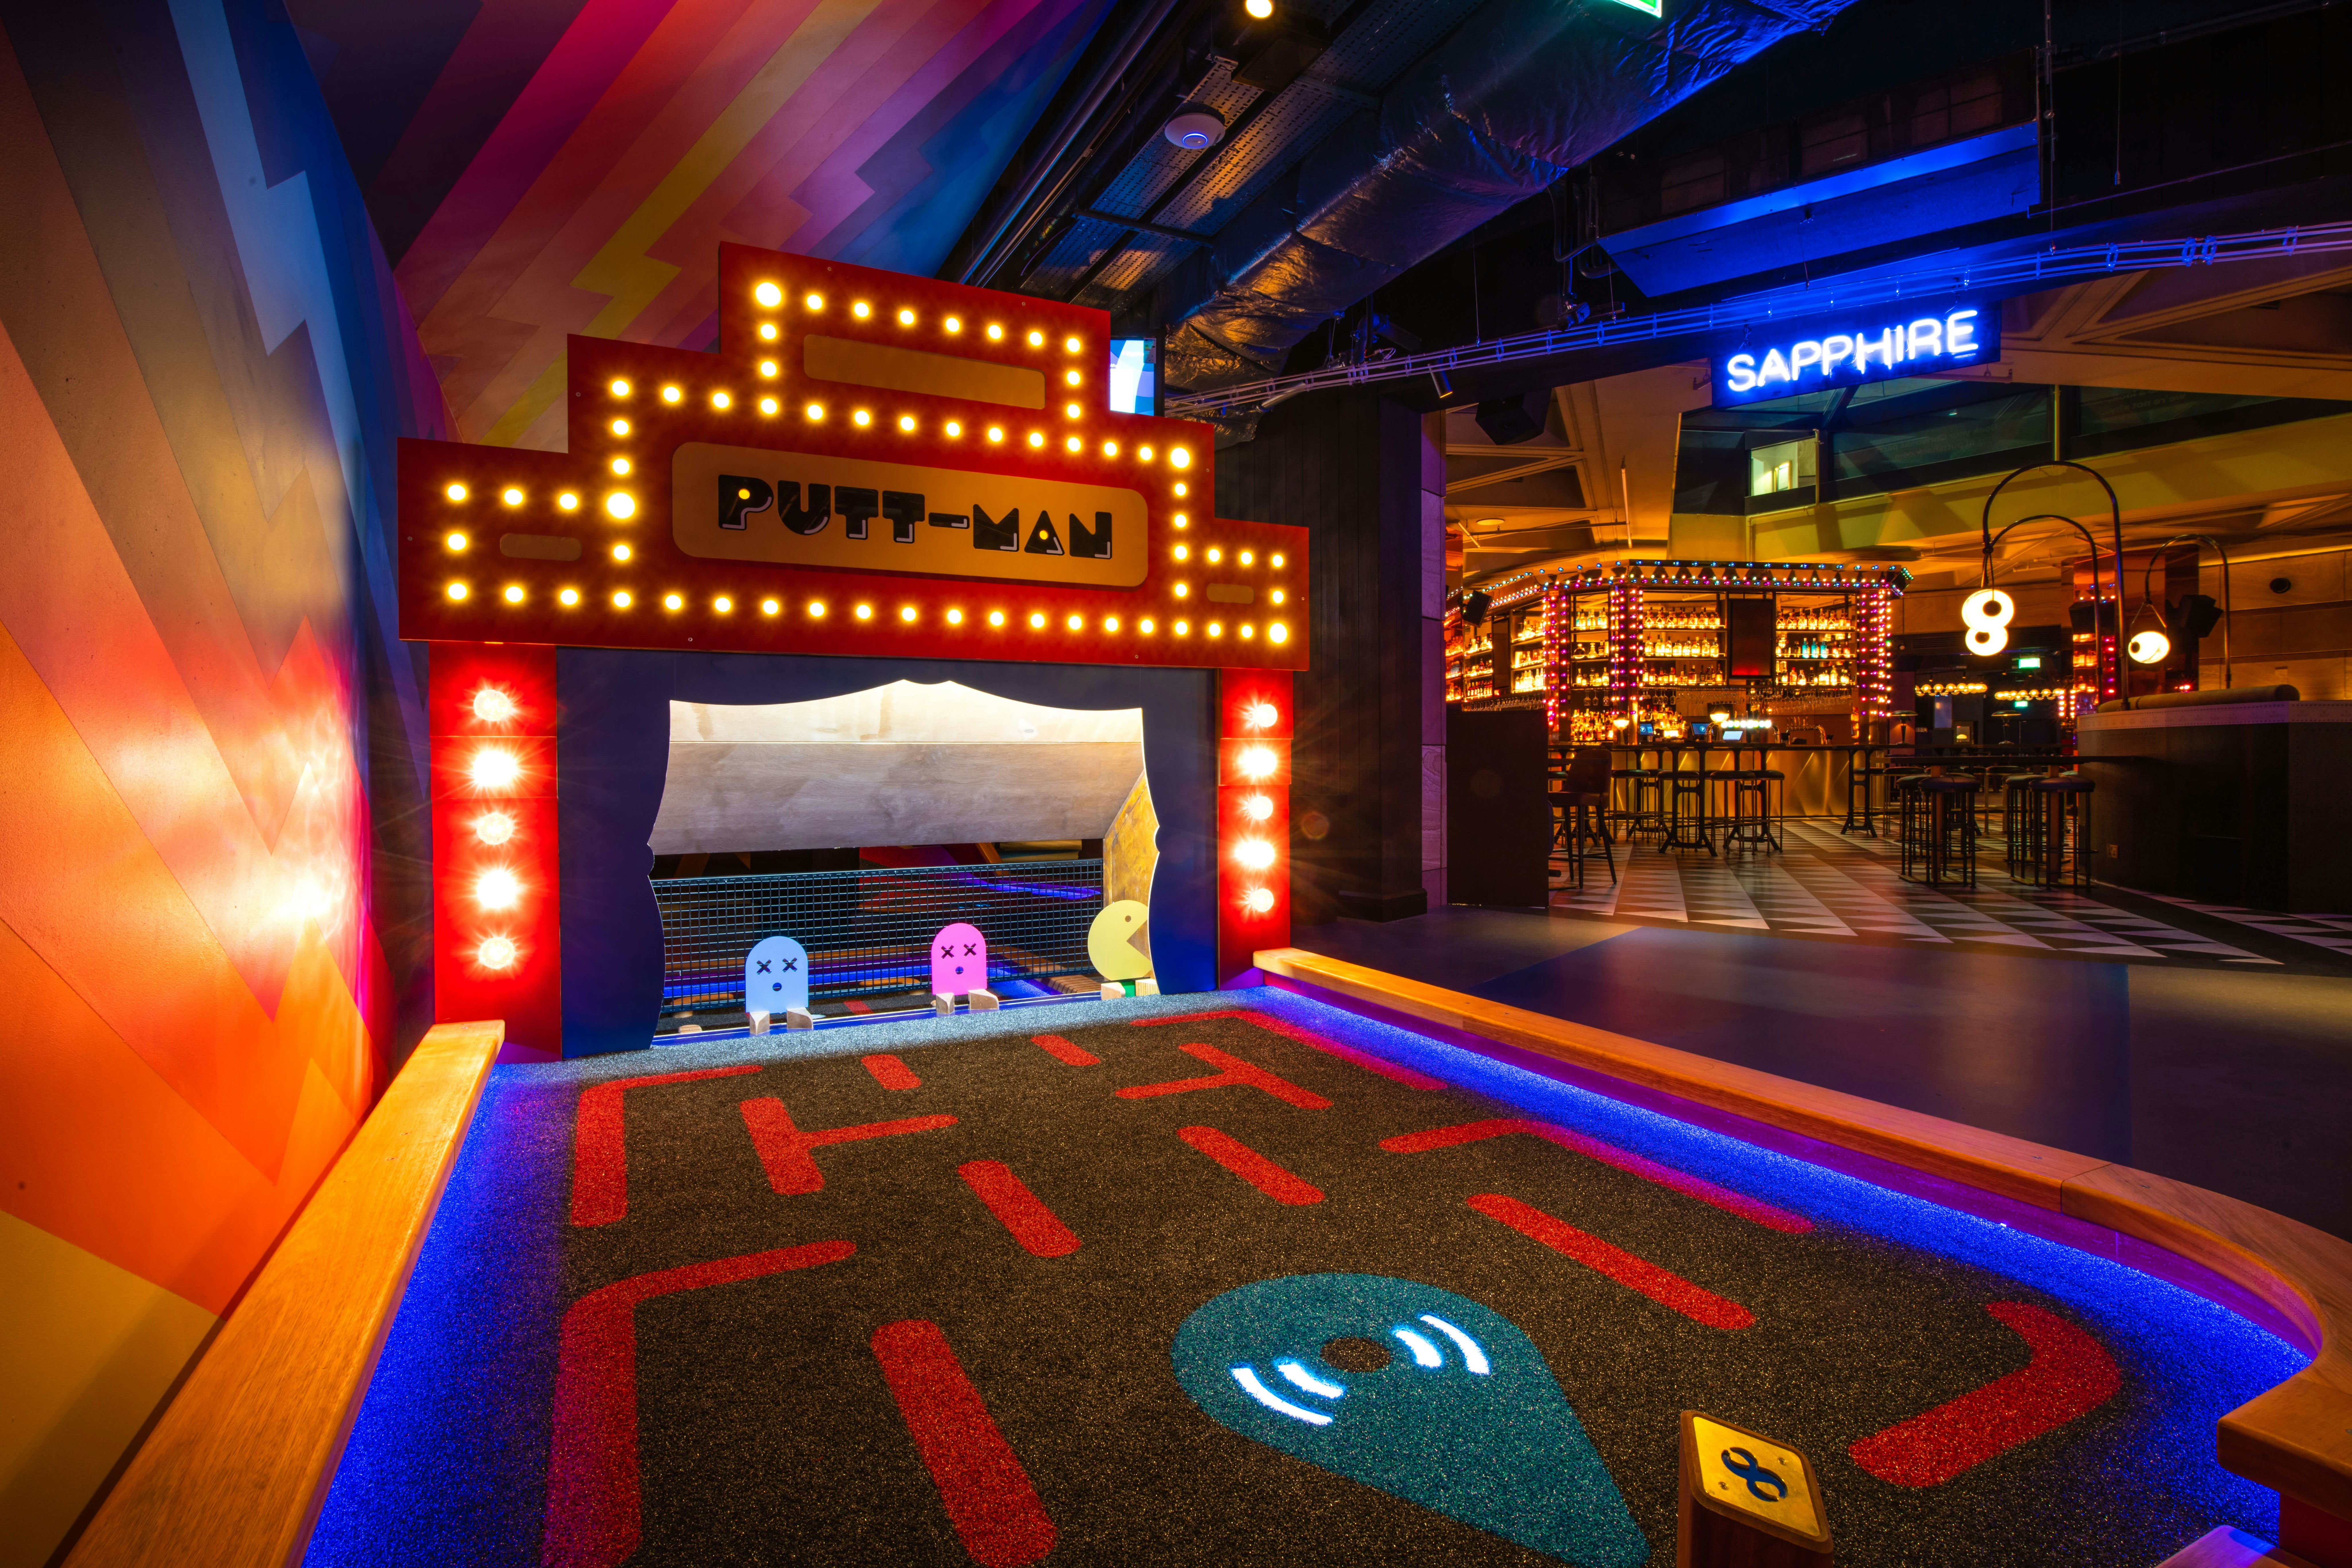 A colorful bar and Pac-Man putting green called Putt-Man at the Puttshack Bank location